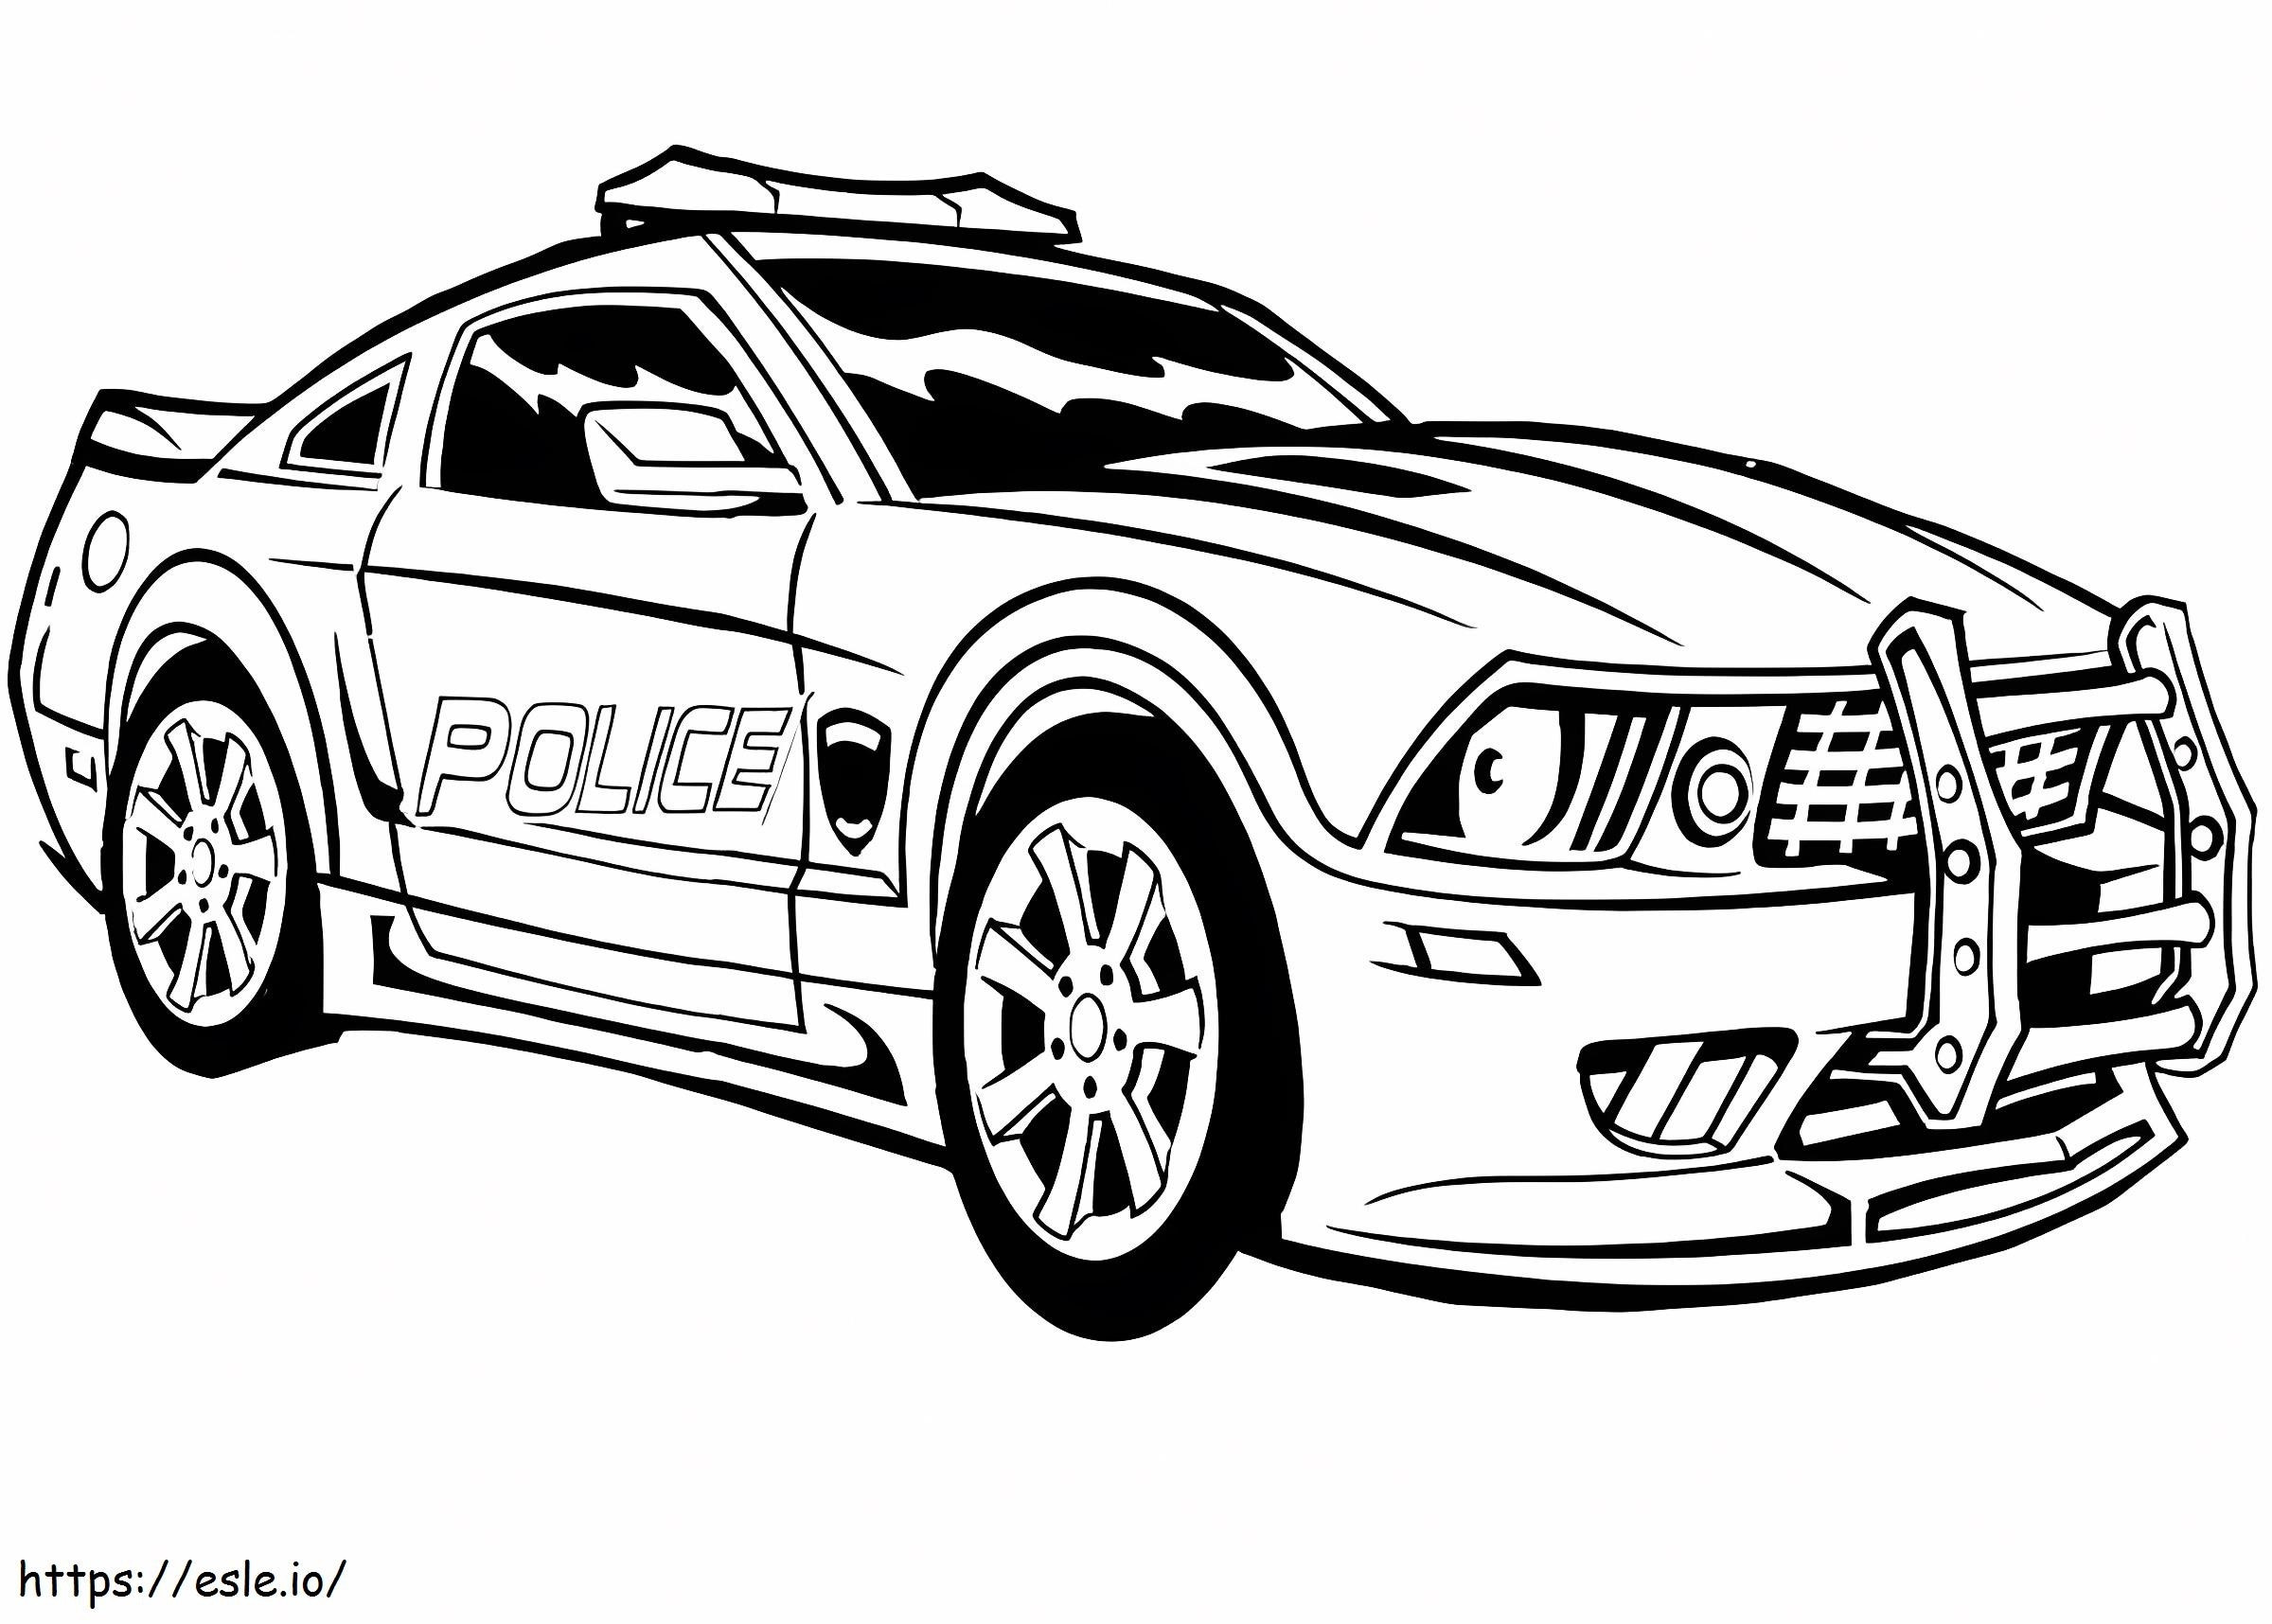 Cool Police Car coloring page